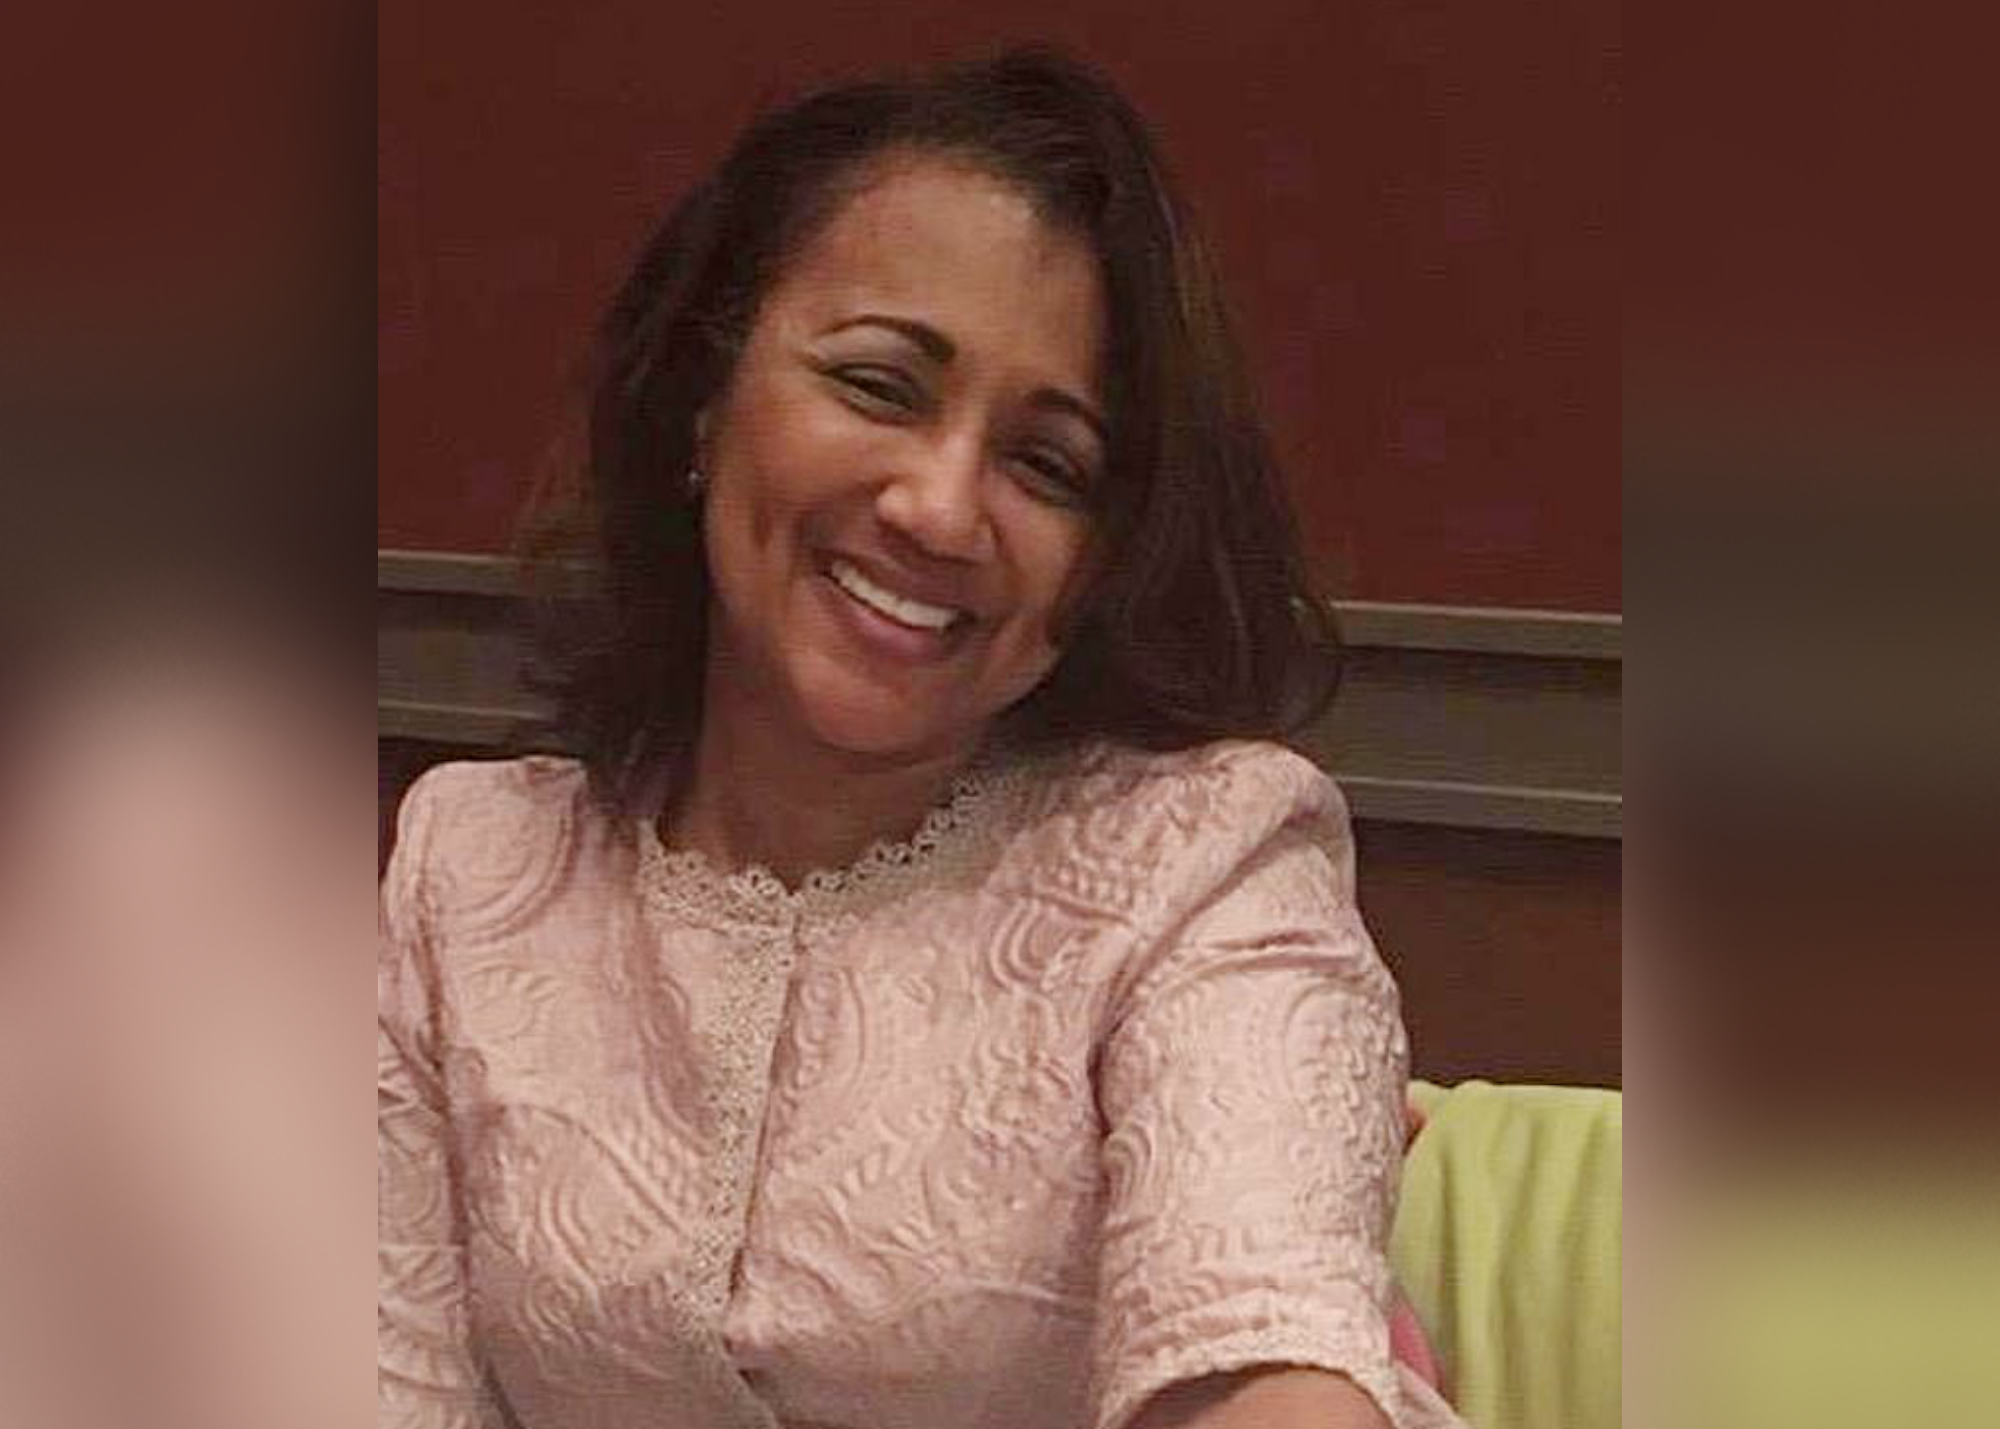 Baltimore Gospel Radio Host Shot And Killed While Protecting Her Son, According To Family